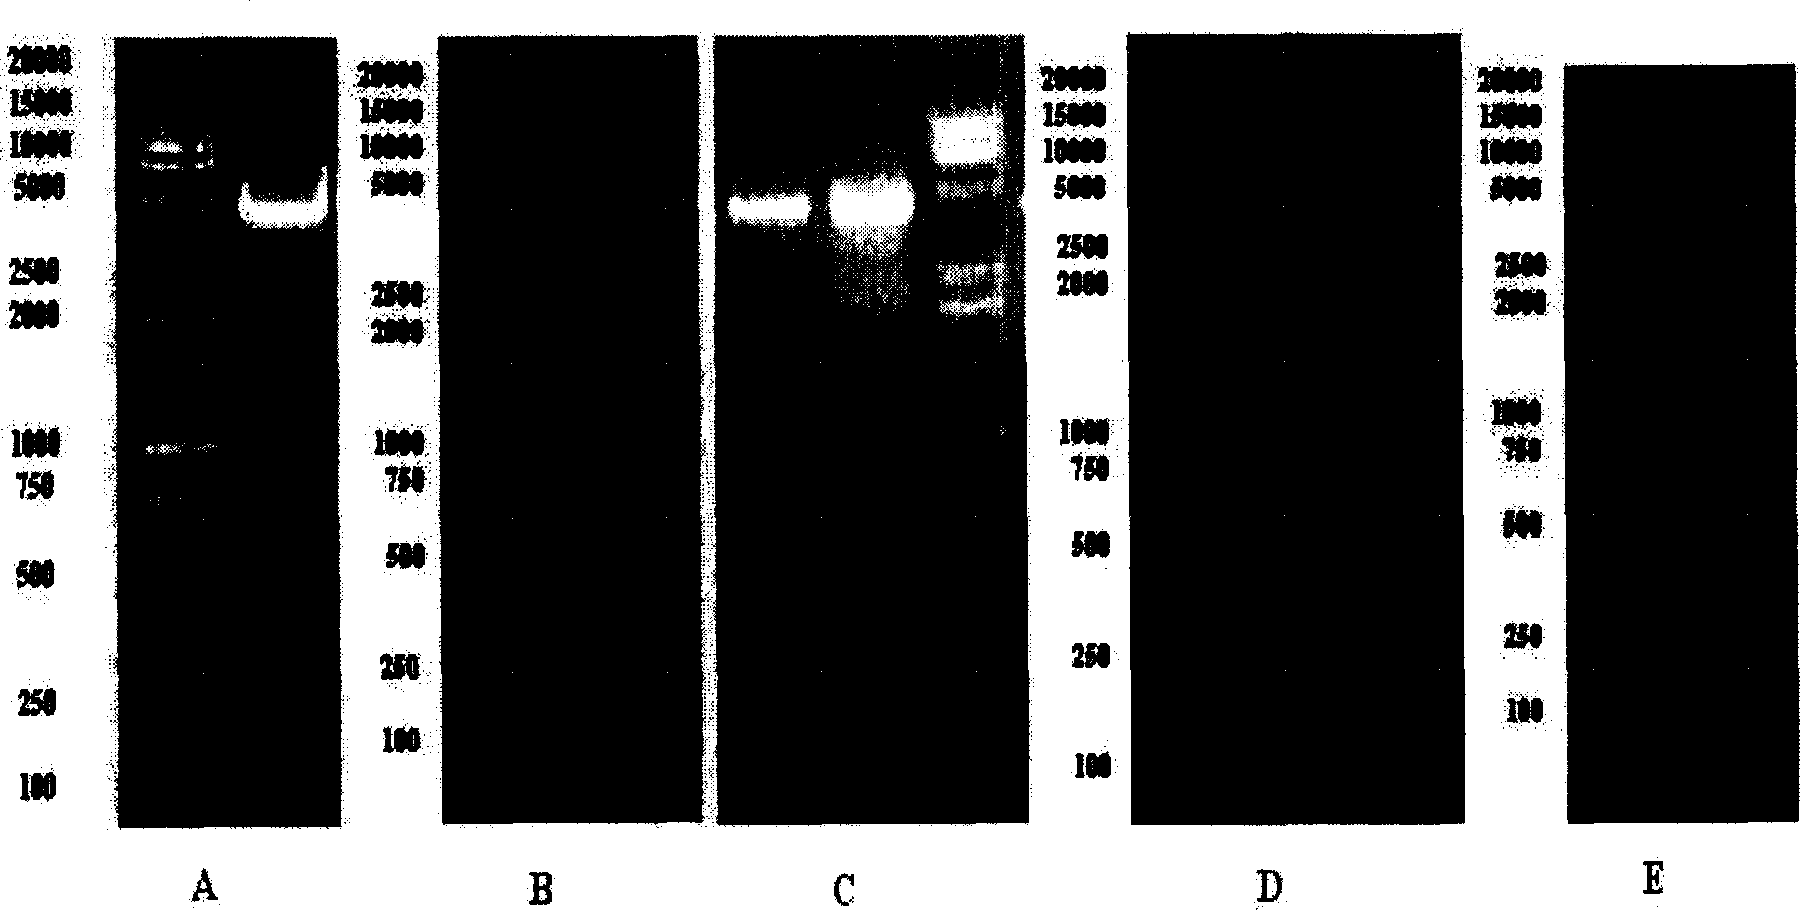 Recombinant plasmids containing B cell activation factor gene promoters with different lengths and their preparation method and application